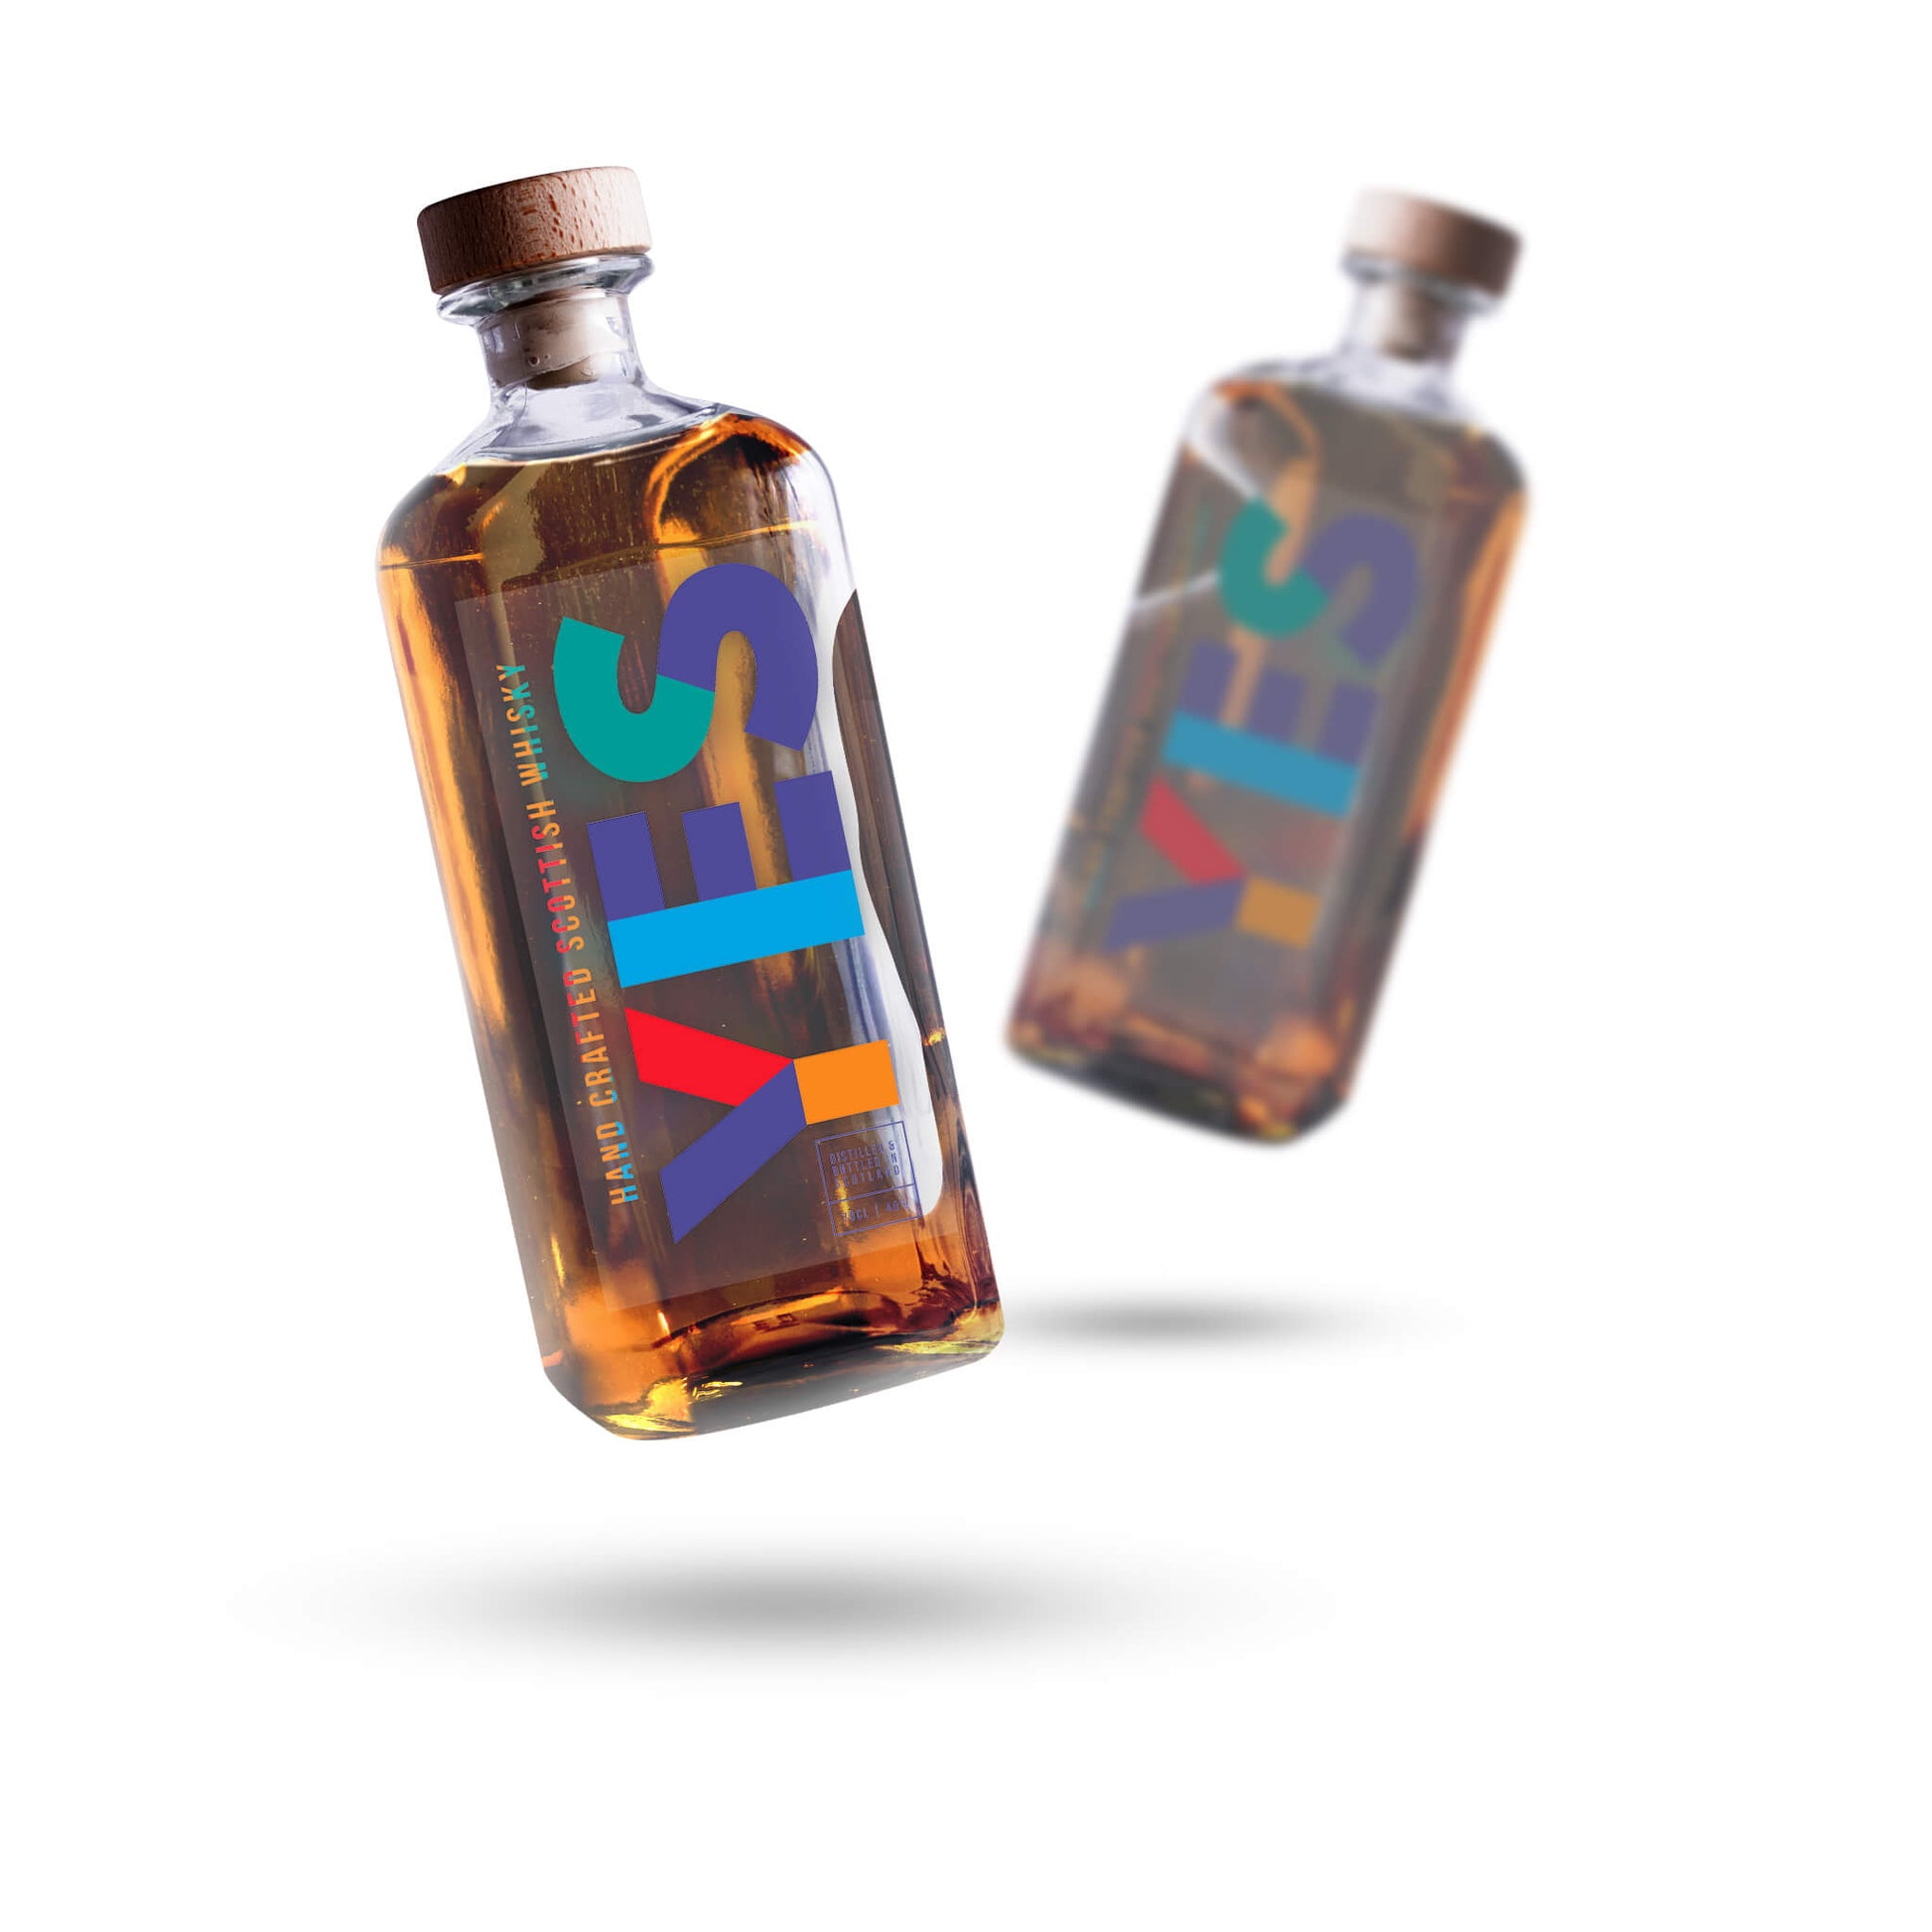 YES Blended Scotch Whisky - Scottish Independence - SNP